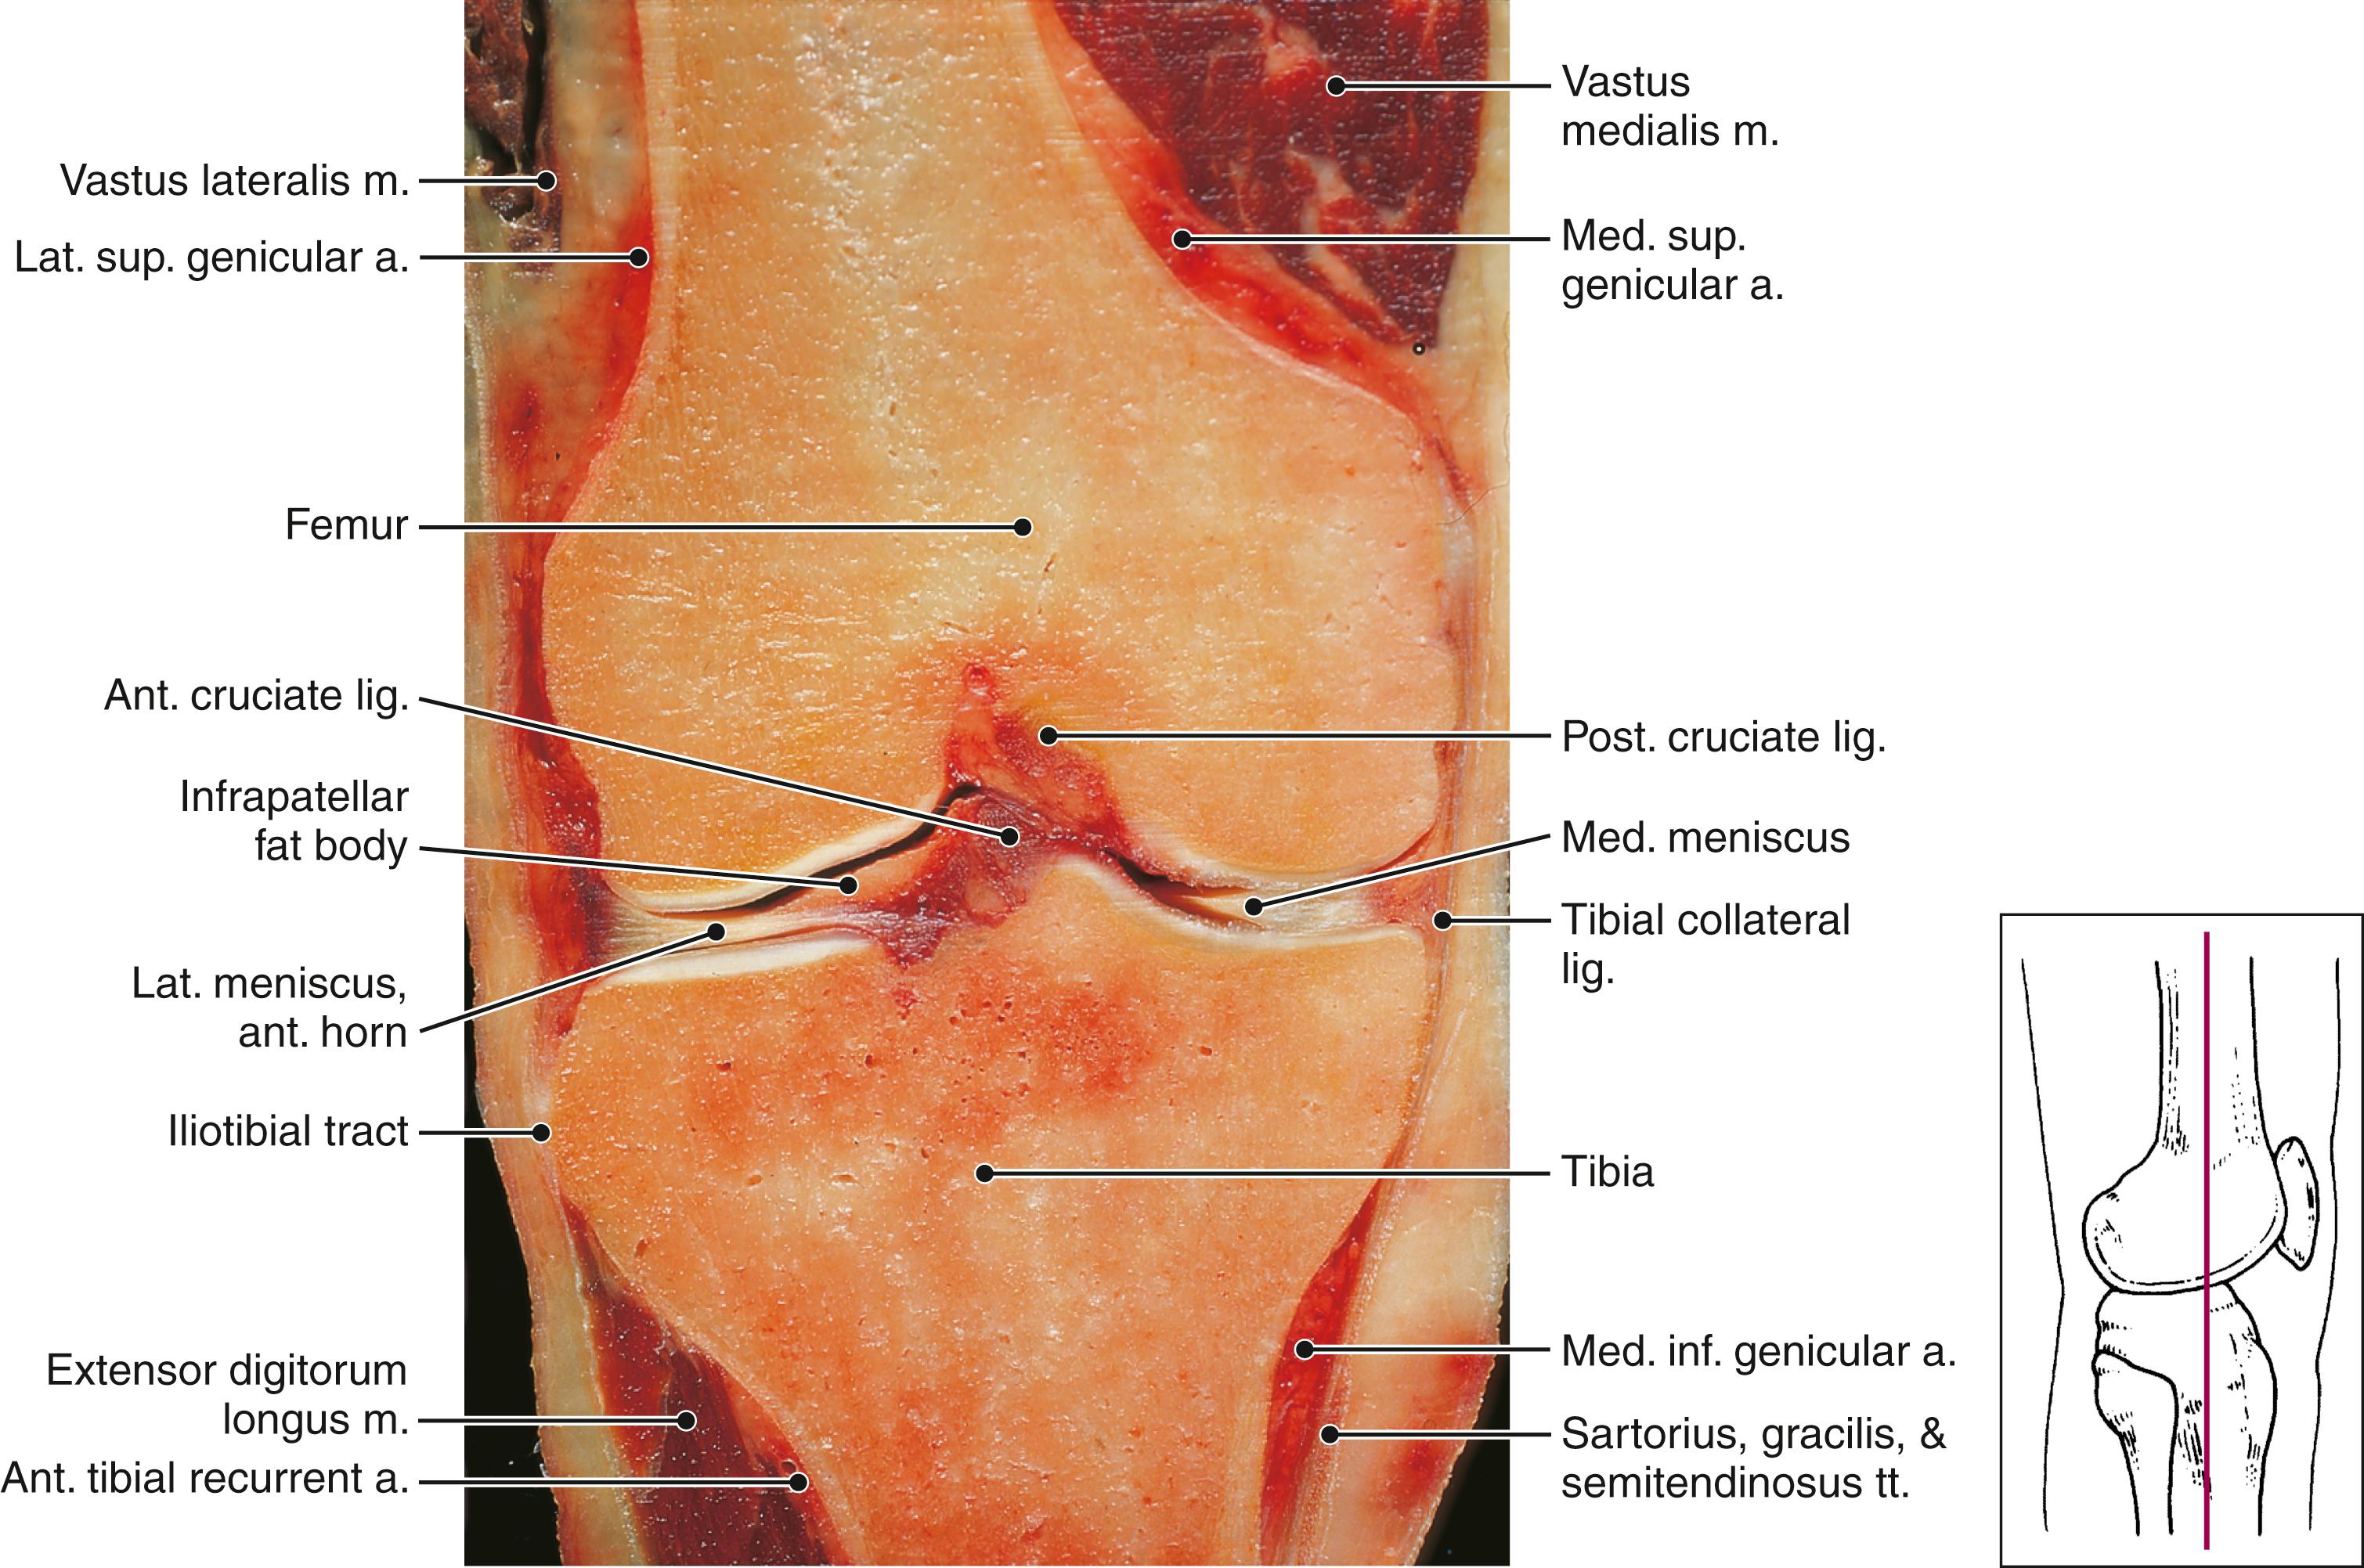 FIG. 163.2, Anatomy of the medial collateral ligament and adjacent structures. a., Artery; ant., anterior; inf., inferior; lat., lateral; lig., ligament; m., muscle; med., medial; post., posterior; sup., superior, tt., tendons.